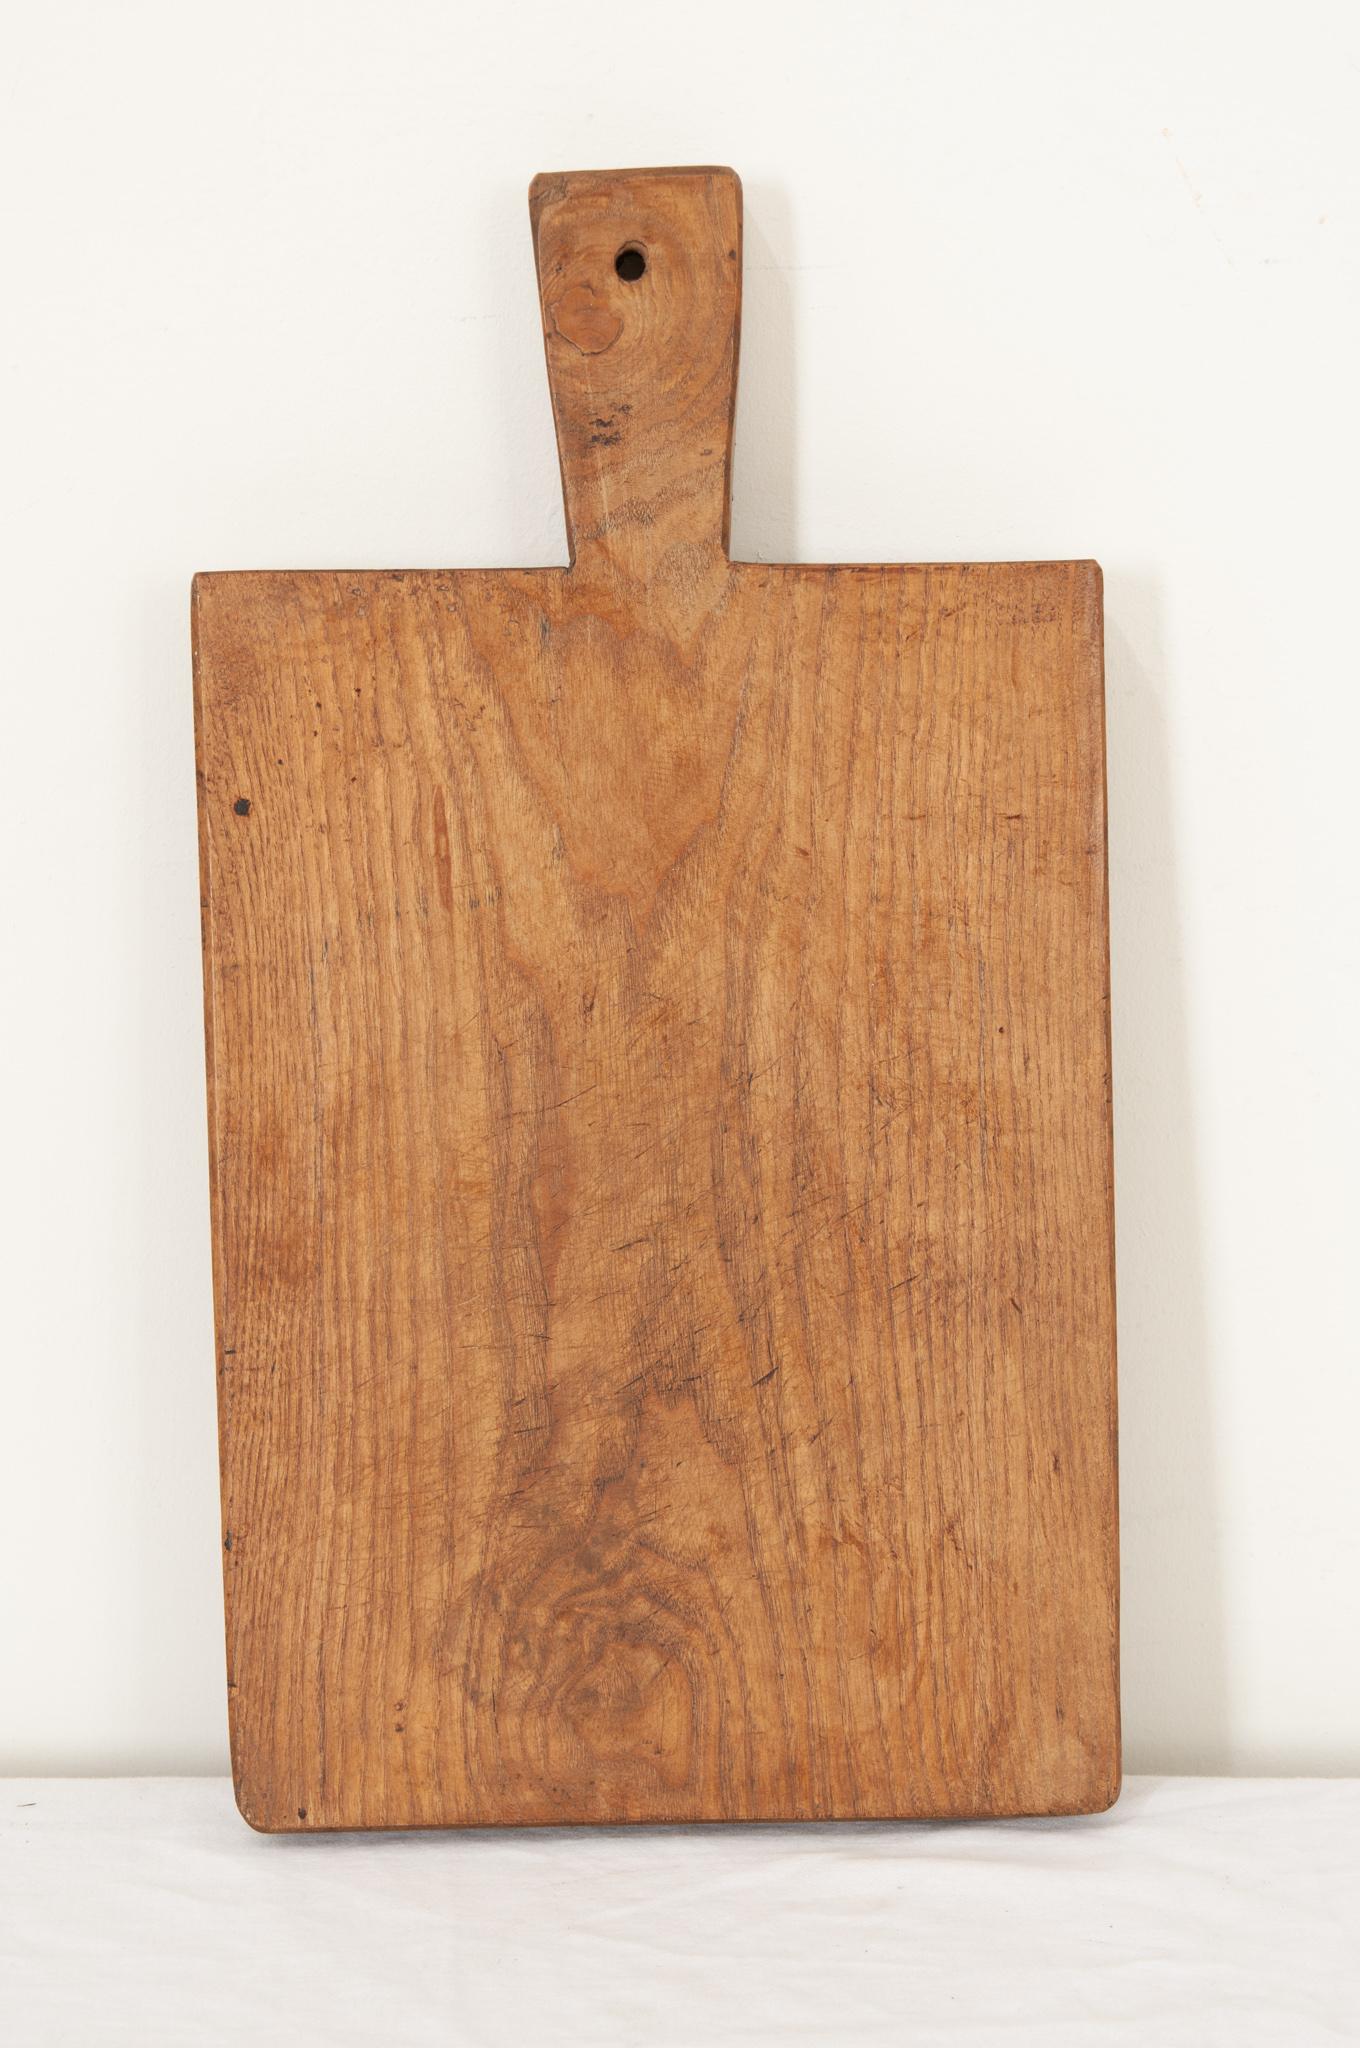 A solid wood cutting board from France in a rectangle shape with smooth corners and a handle. The worn board is made of a single piece of wood. Knife marks and scrapes that were left by cooks, now long gone, can be seen and felt as if they were made